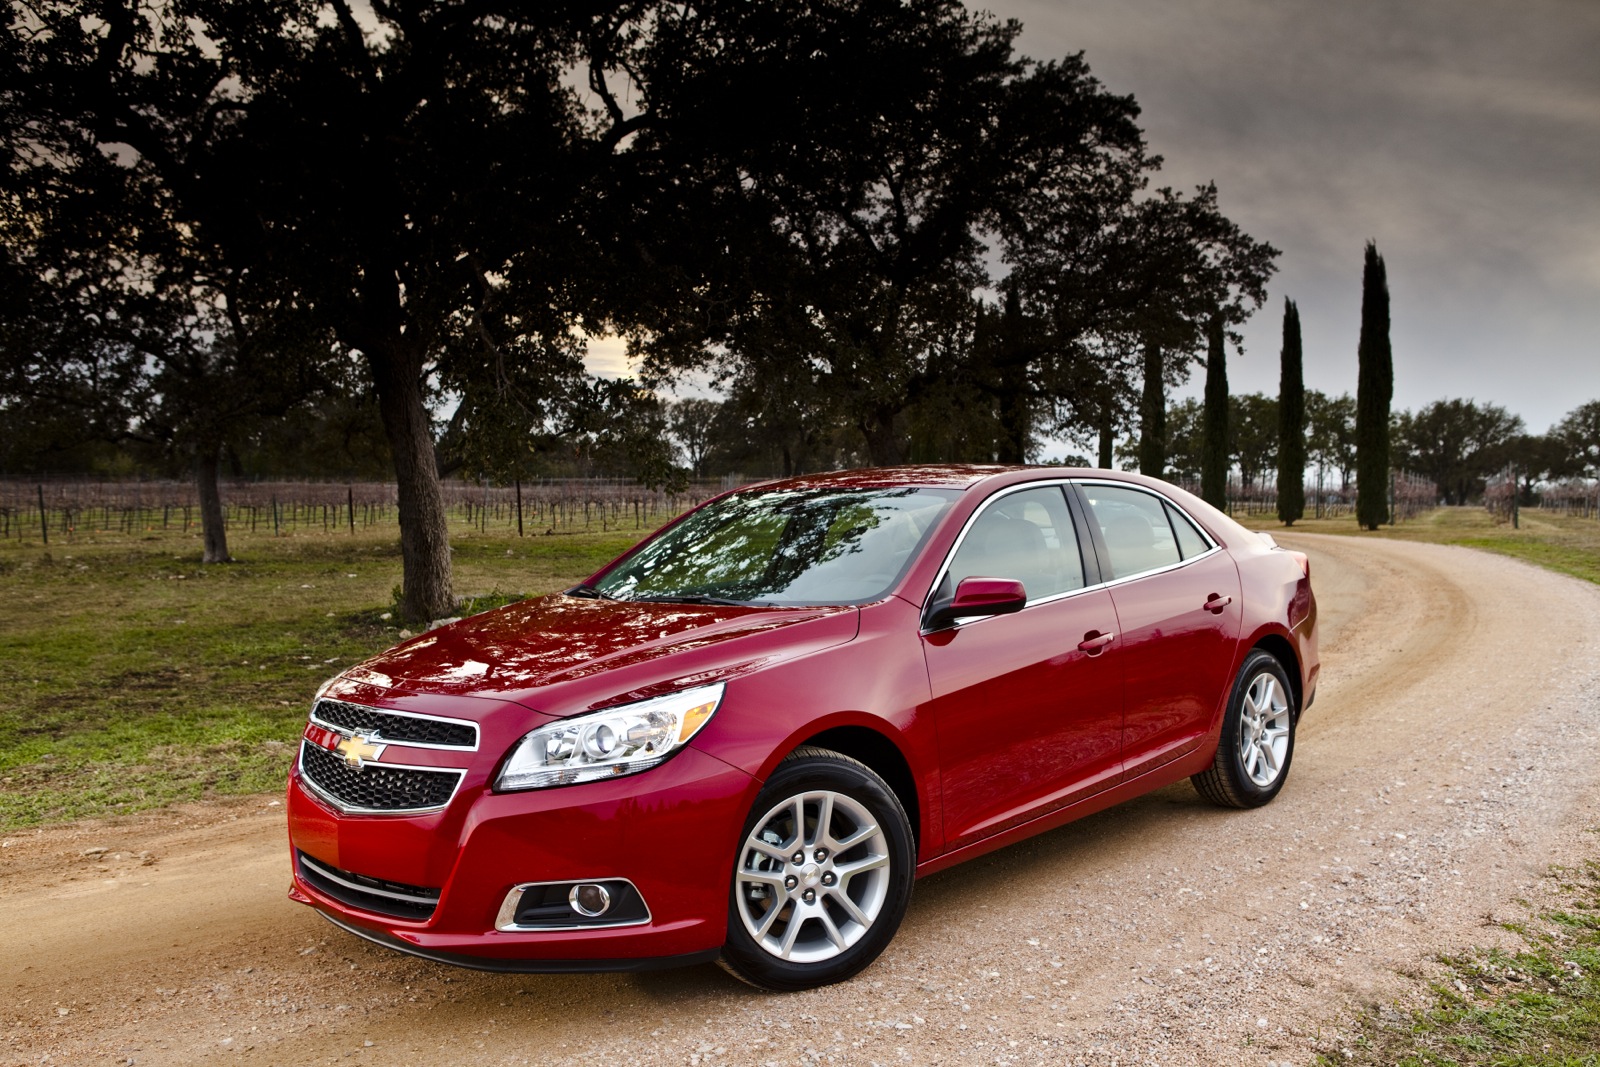 2013 Chevrolet Malibu (Chevy) Review, Ratings, Specs, Prices, and Photos -  The Car Connection